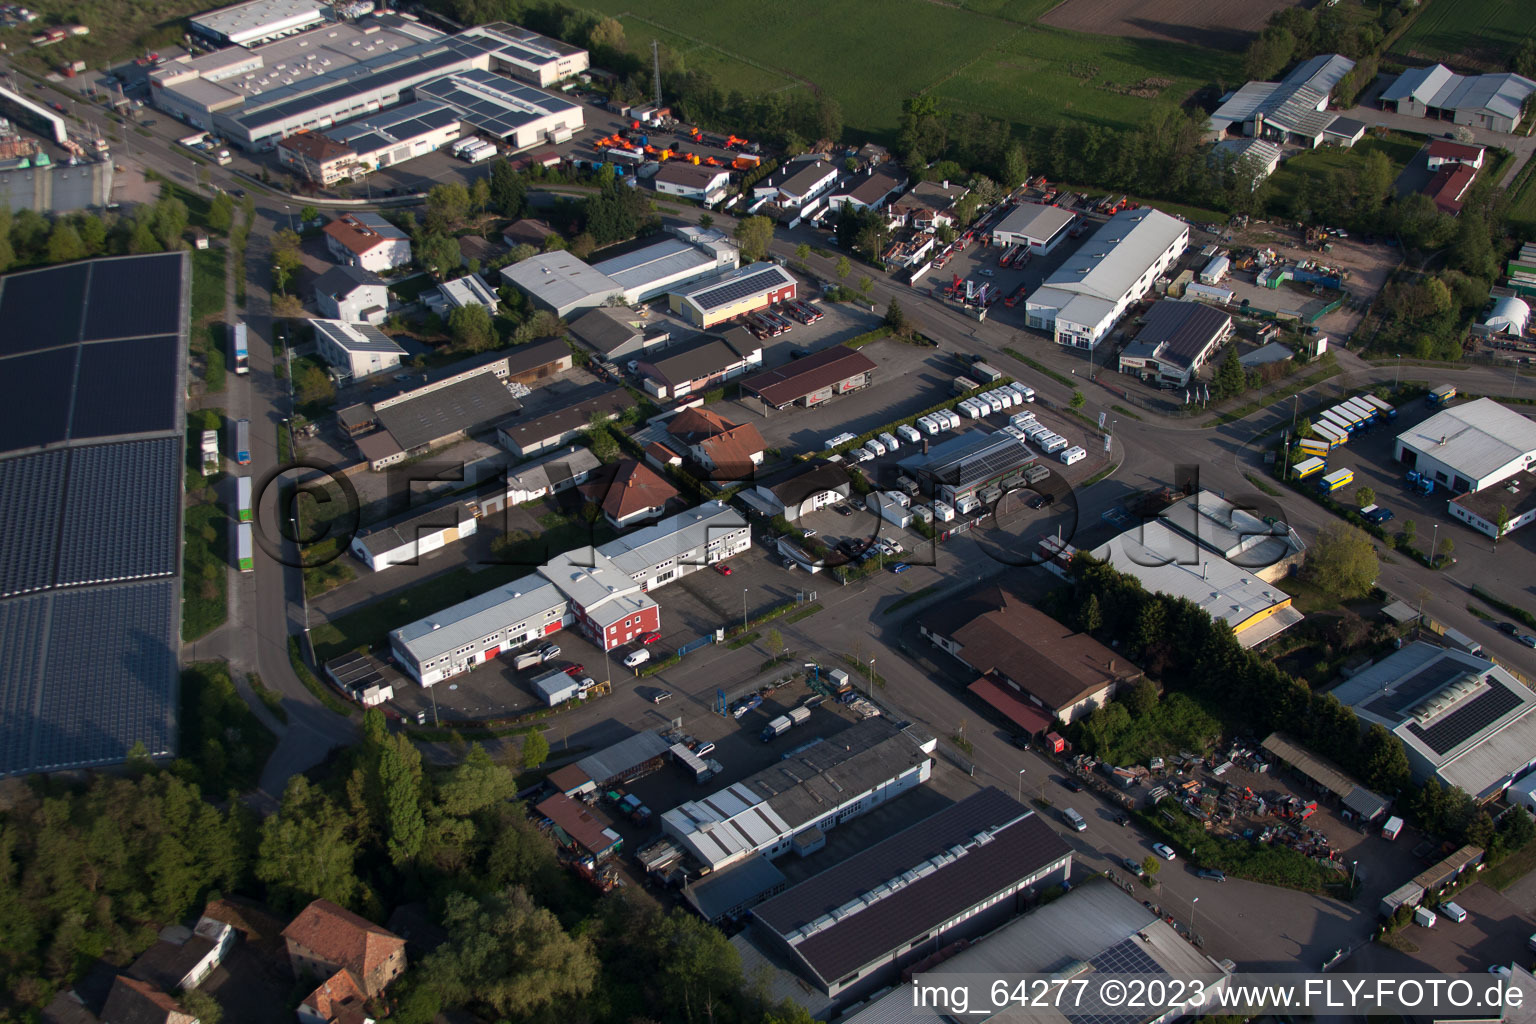 Horst industrial area in the district Minderslachen in Kandel in the state Rhineland-Palatinate, Germany from above